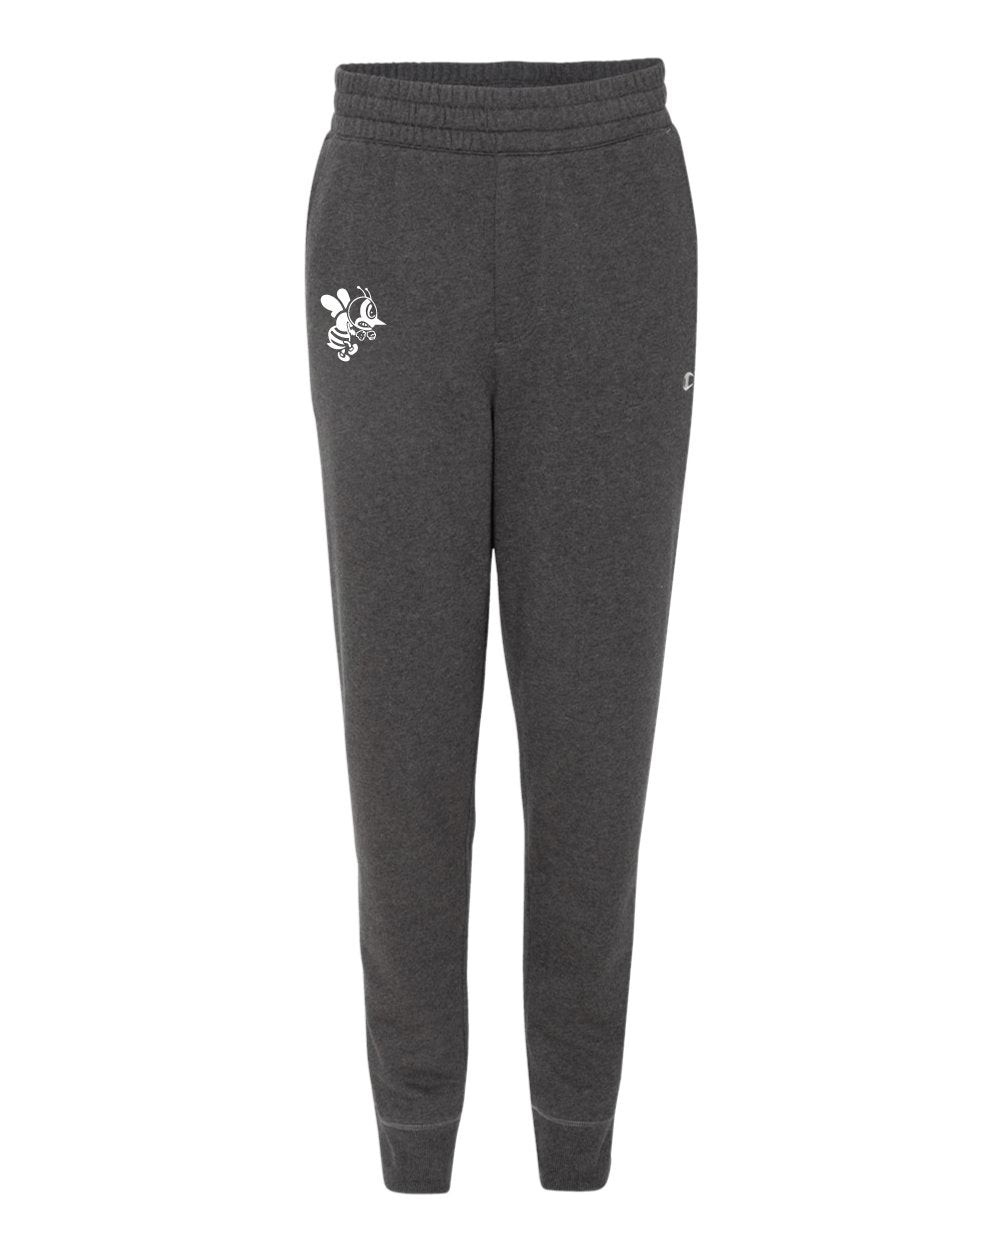 St. Ambrose Champion Sueded Fleece Jogger